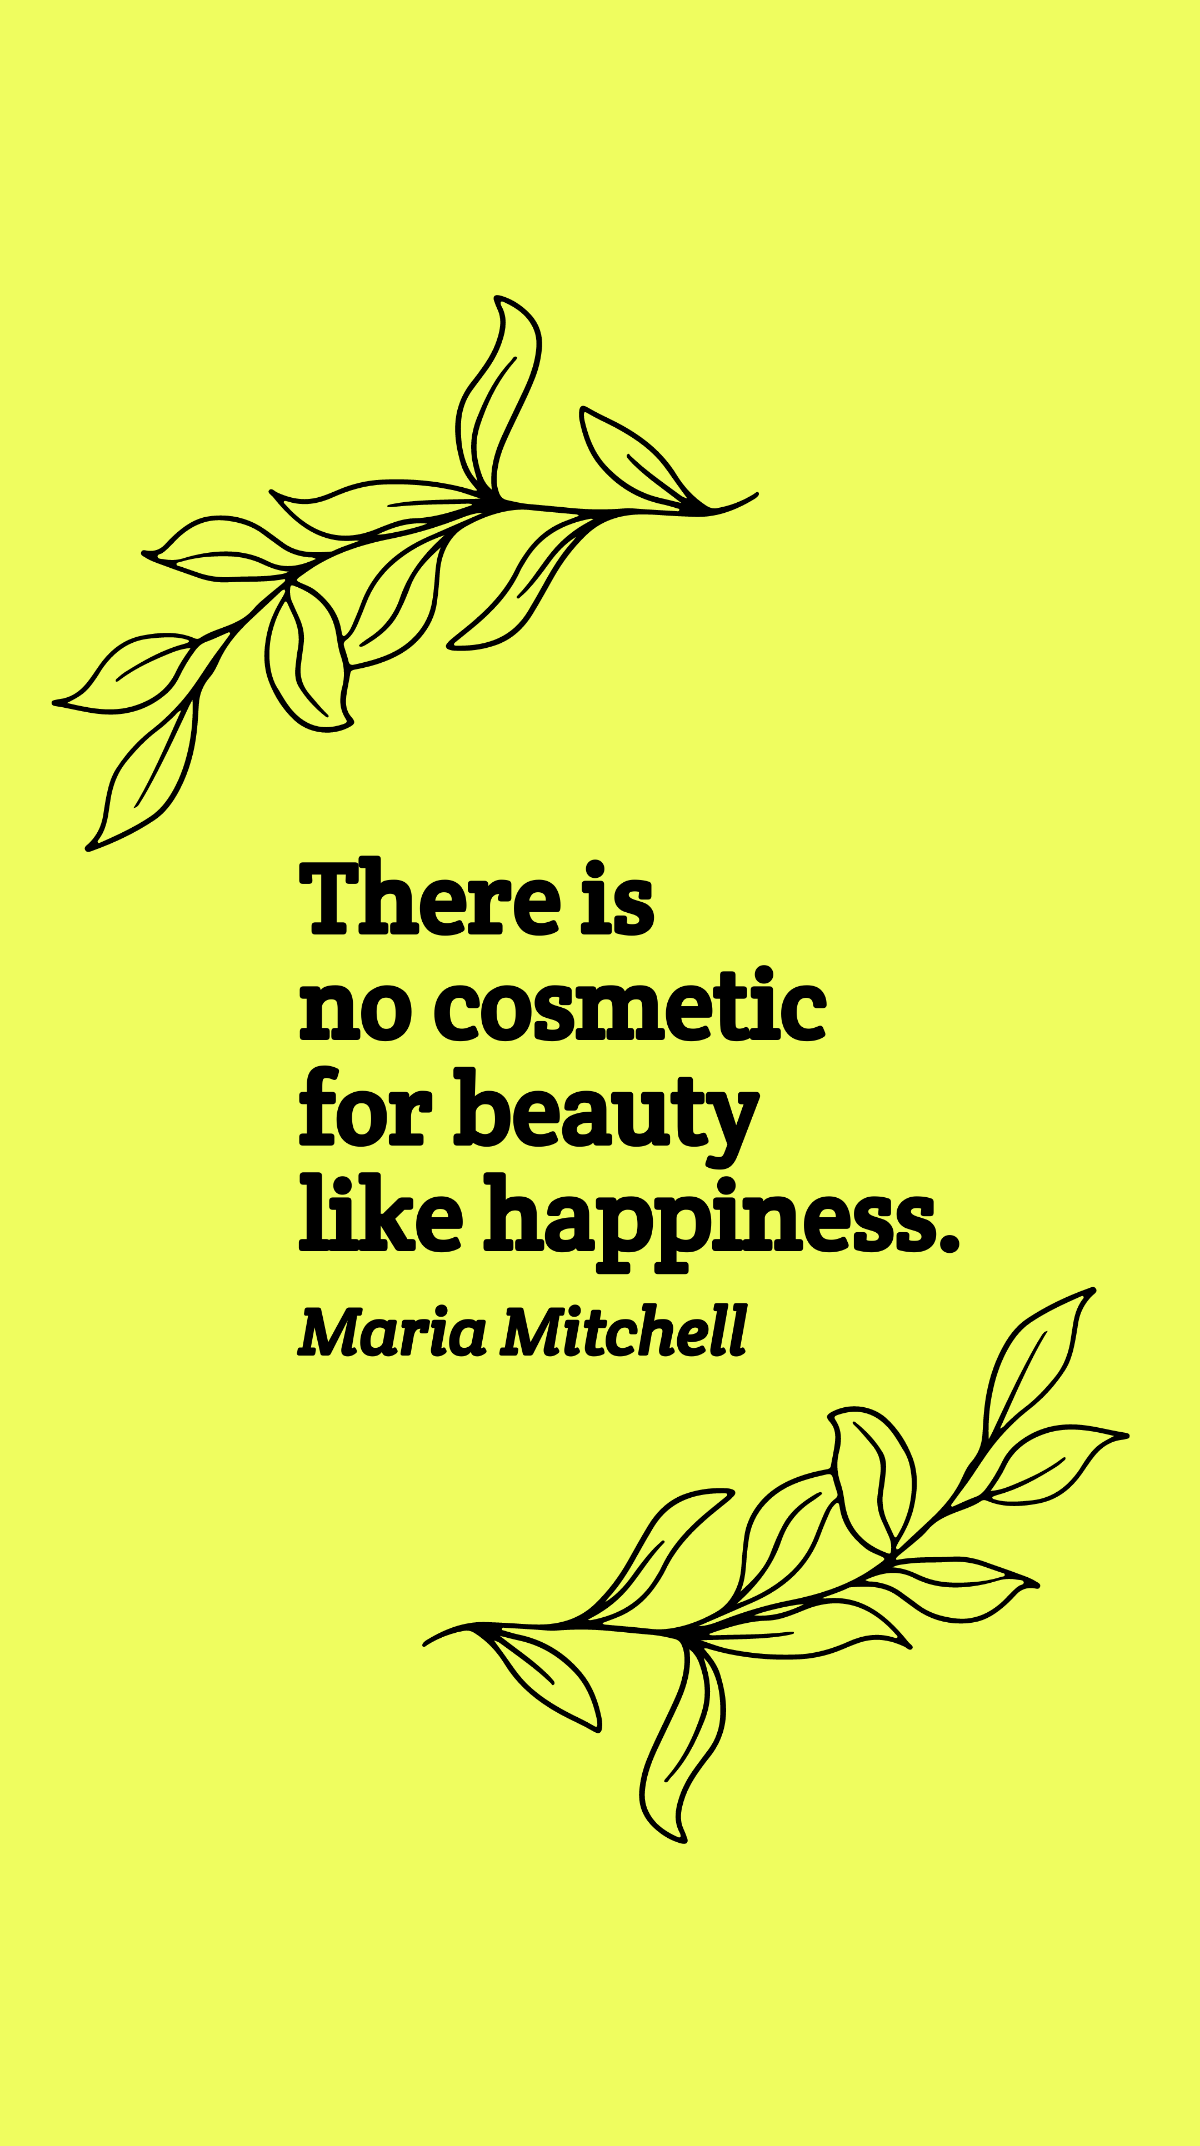 Maria Mitchell - There is no cosmetic for beauty like happiness. Template